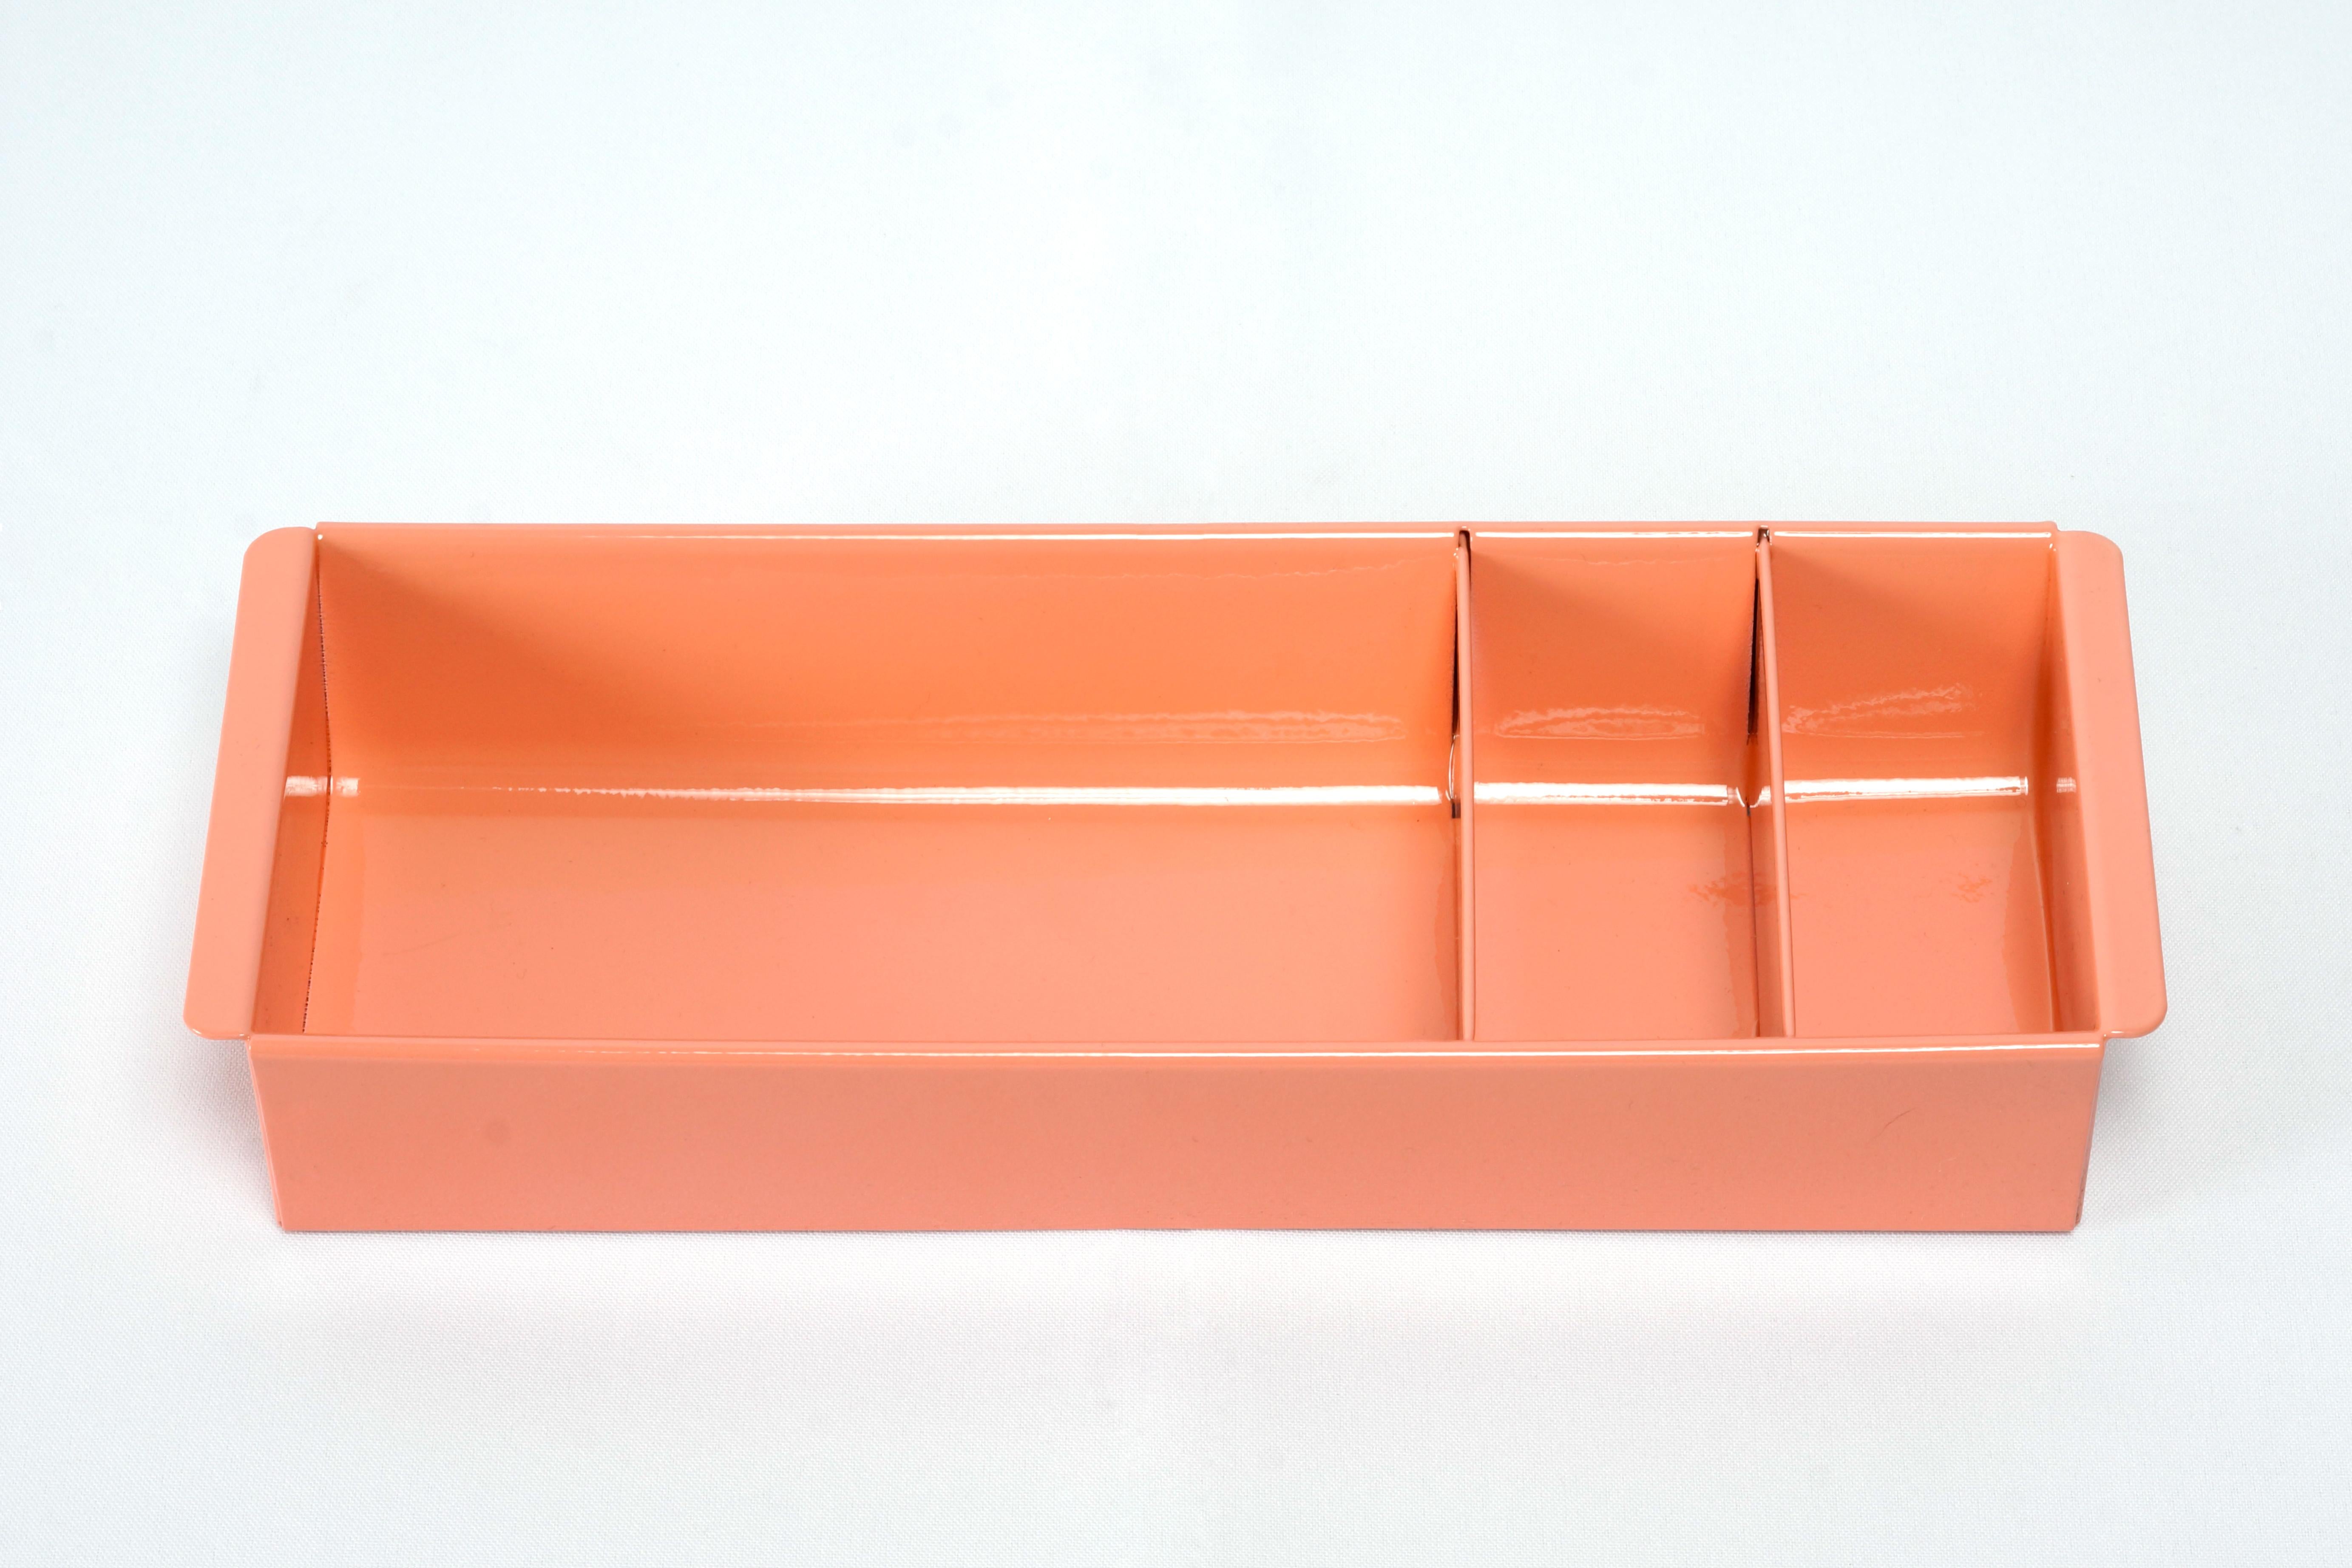 Powder-Coated Steel Tanker Drawer Insert Repurposed as Organizer, Refinished in Peach